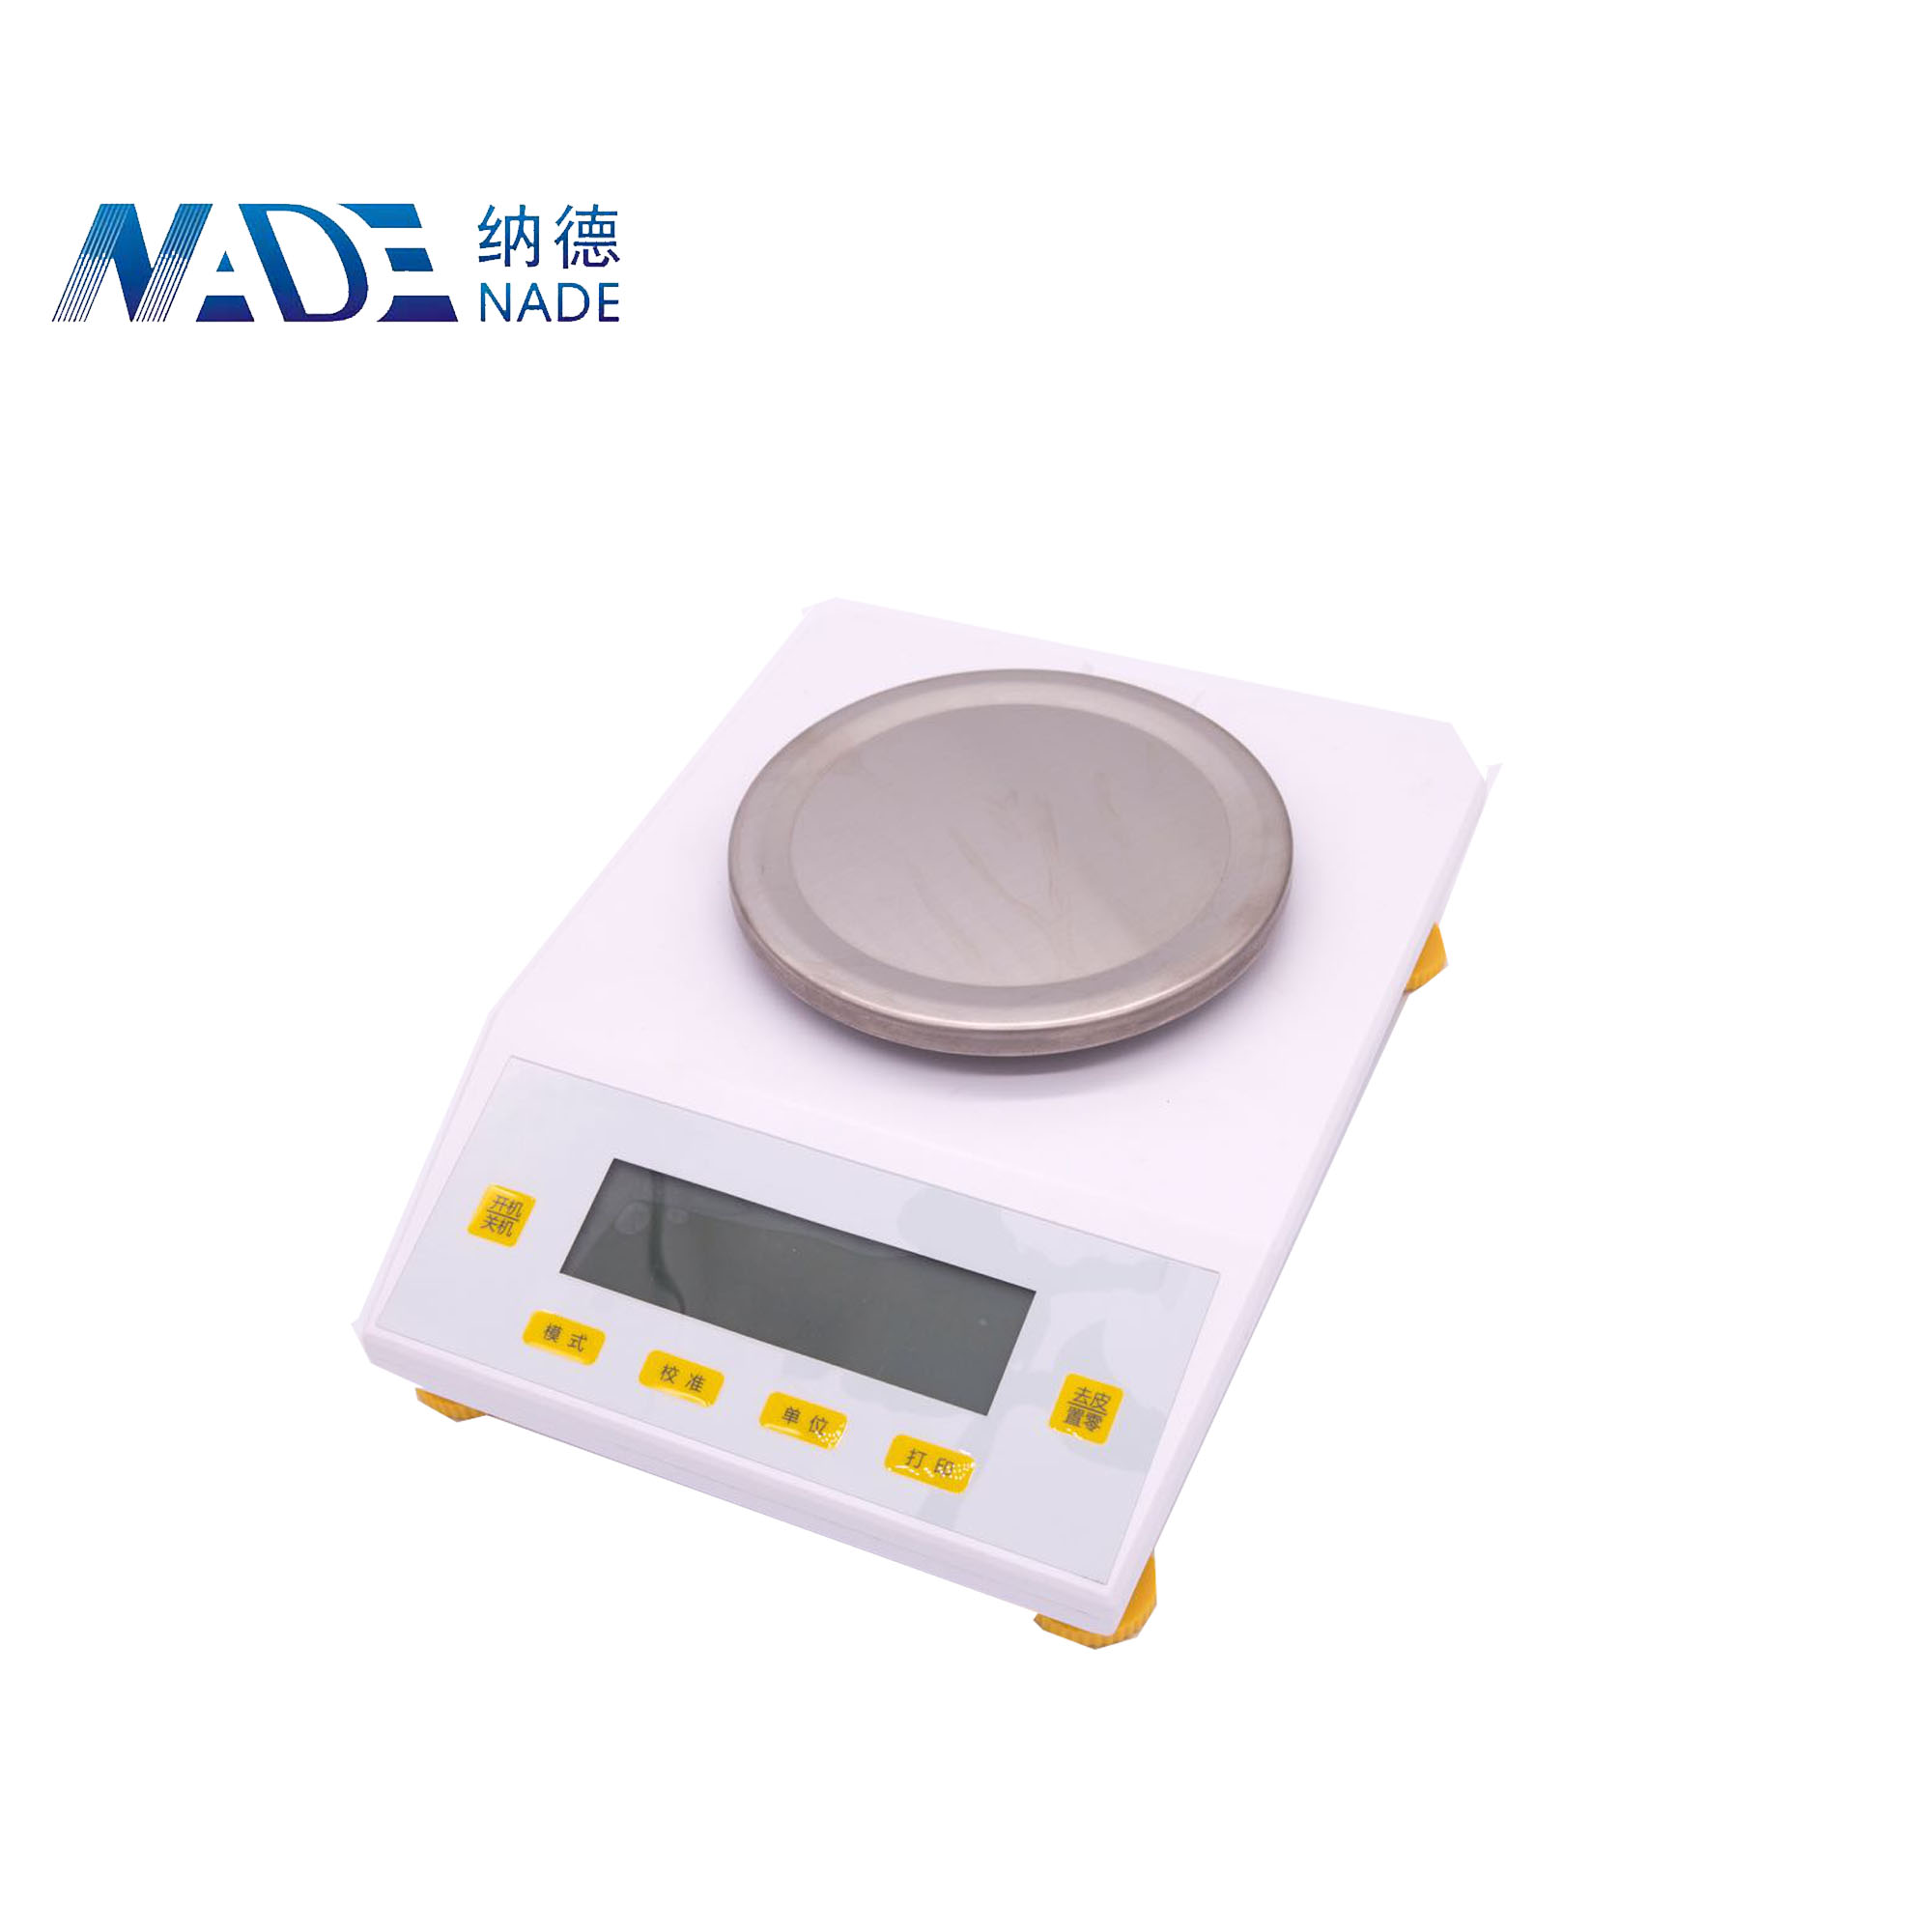 Nade HP lab Weighing Scales Electronic Balance & Digital weight scales MP4002 400g/0.01g